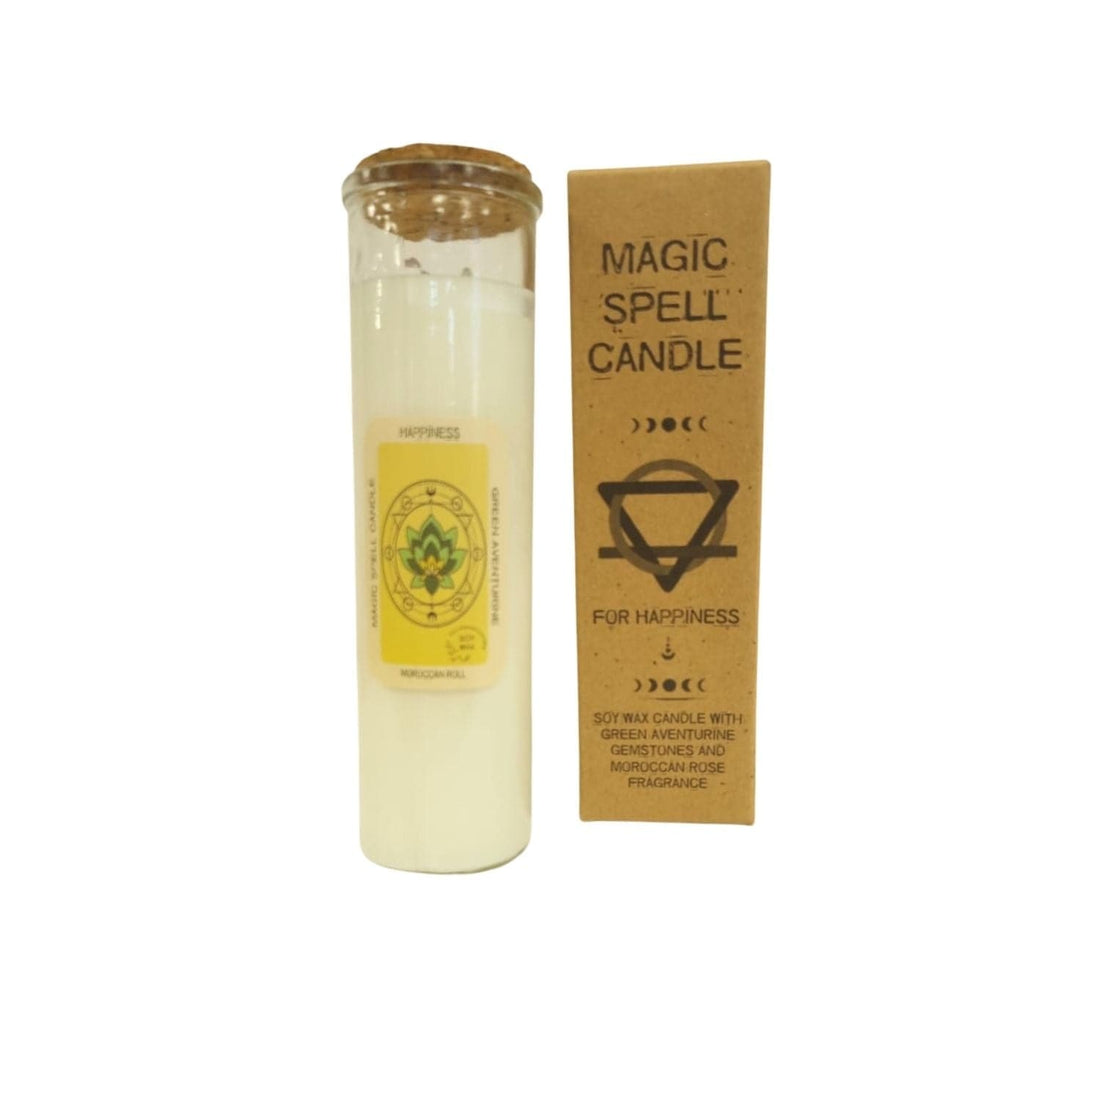 Magic Spell Candle - Happiness - best price from Maltashopper.com MSC-06